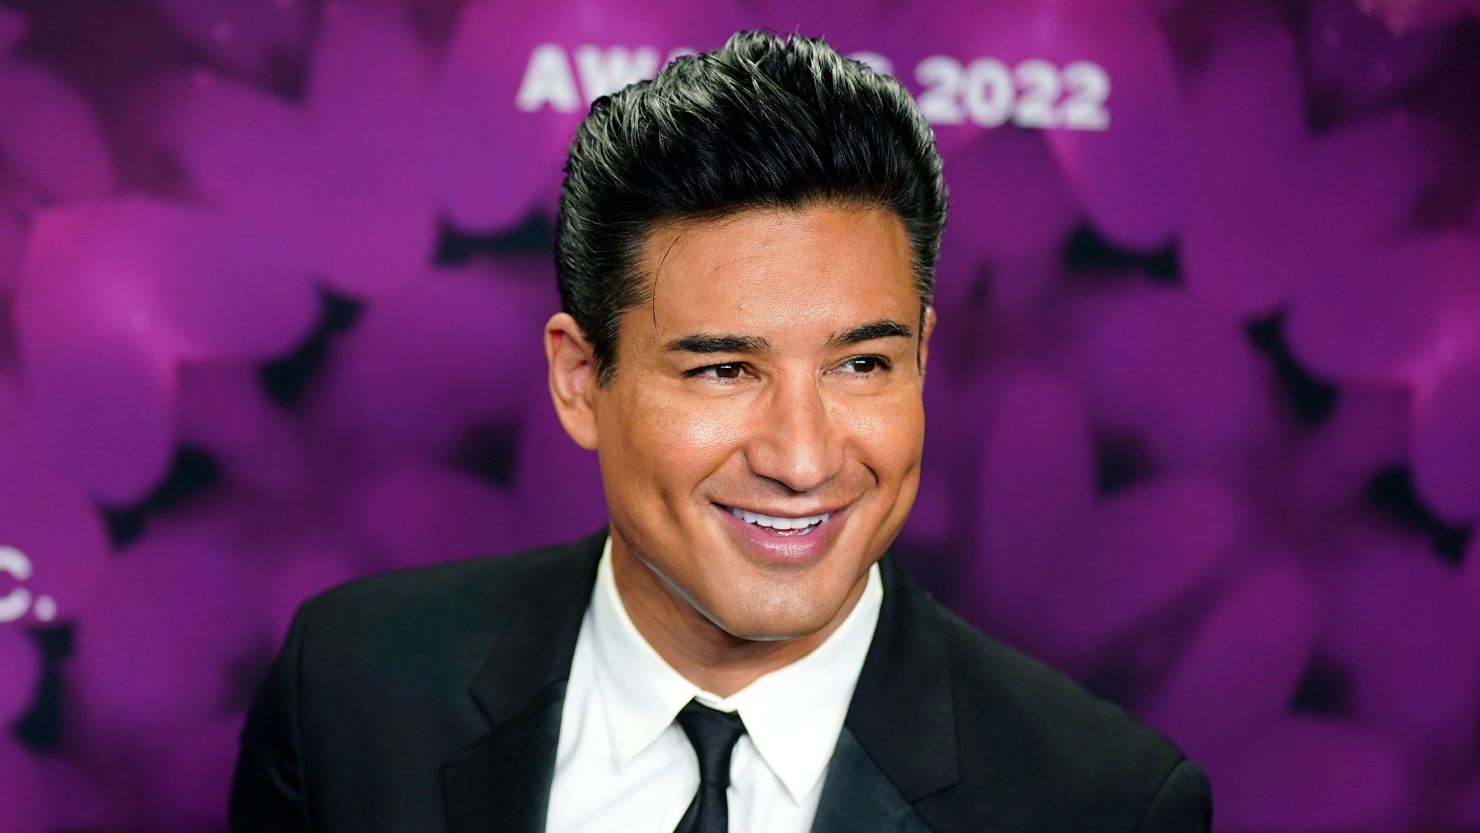 Mario Lopez, seen here attending the 2022 Fragrance Foundation Awards on June 9, 2022, in New York, is going to help find a new generation of Latin boy band Menudo. 